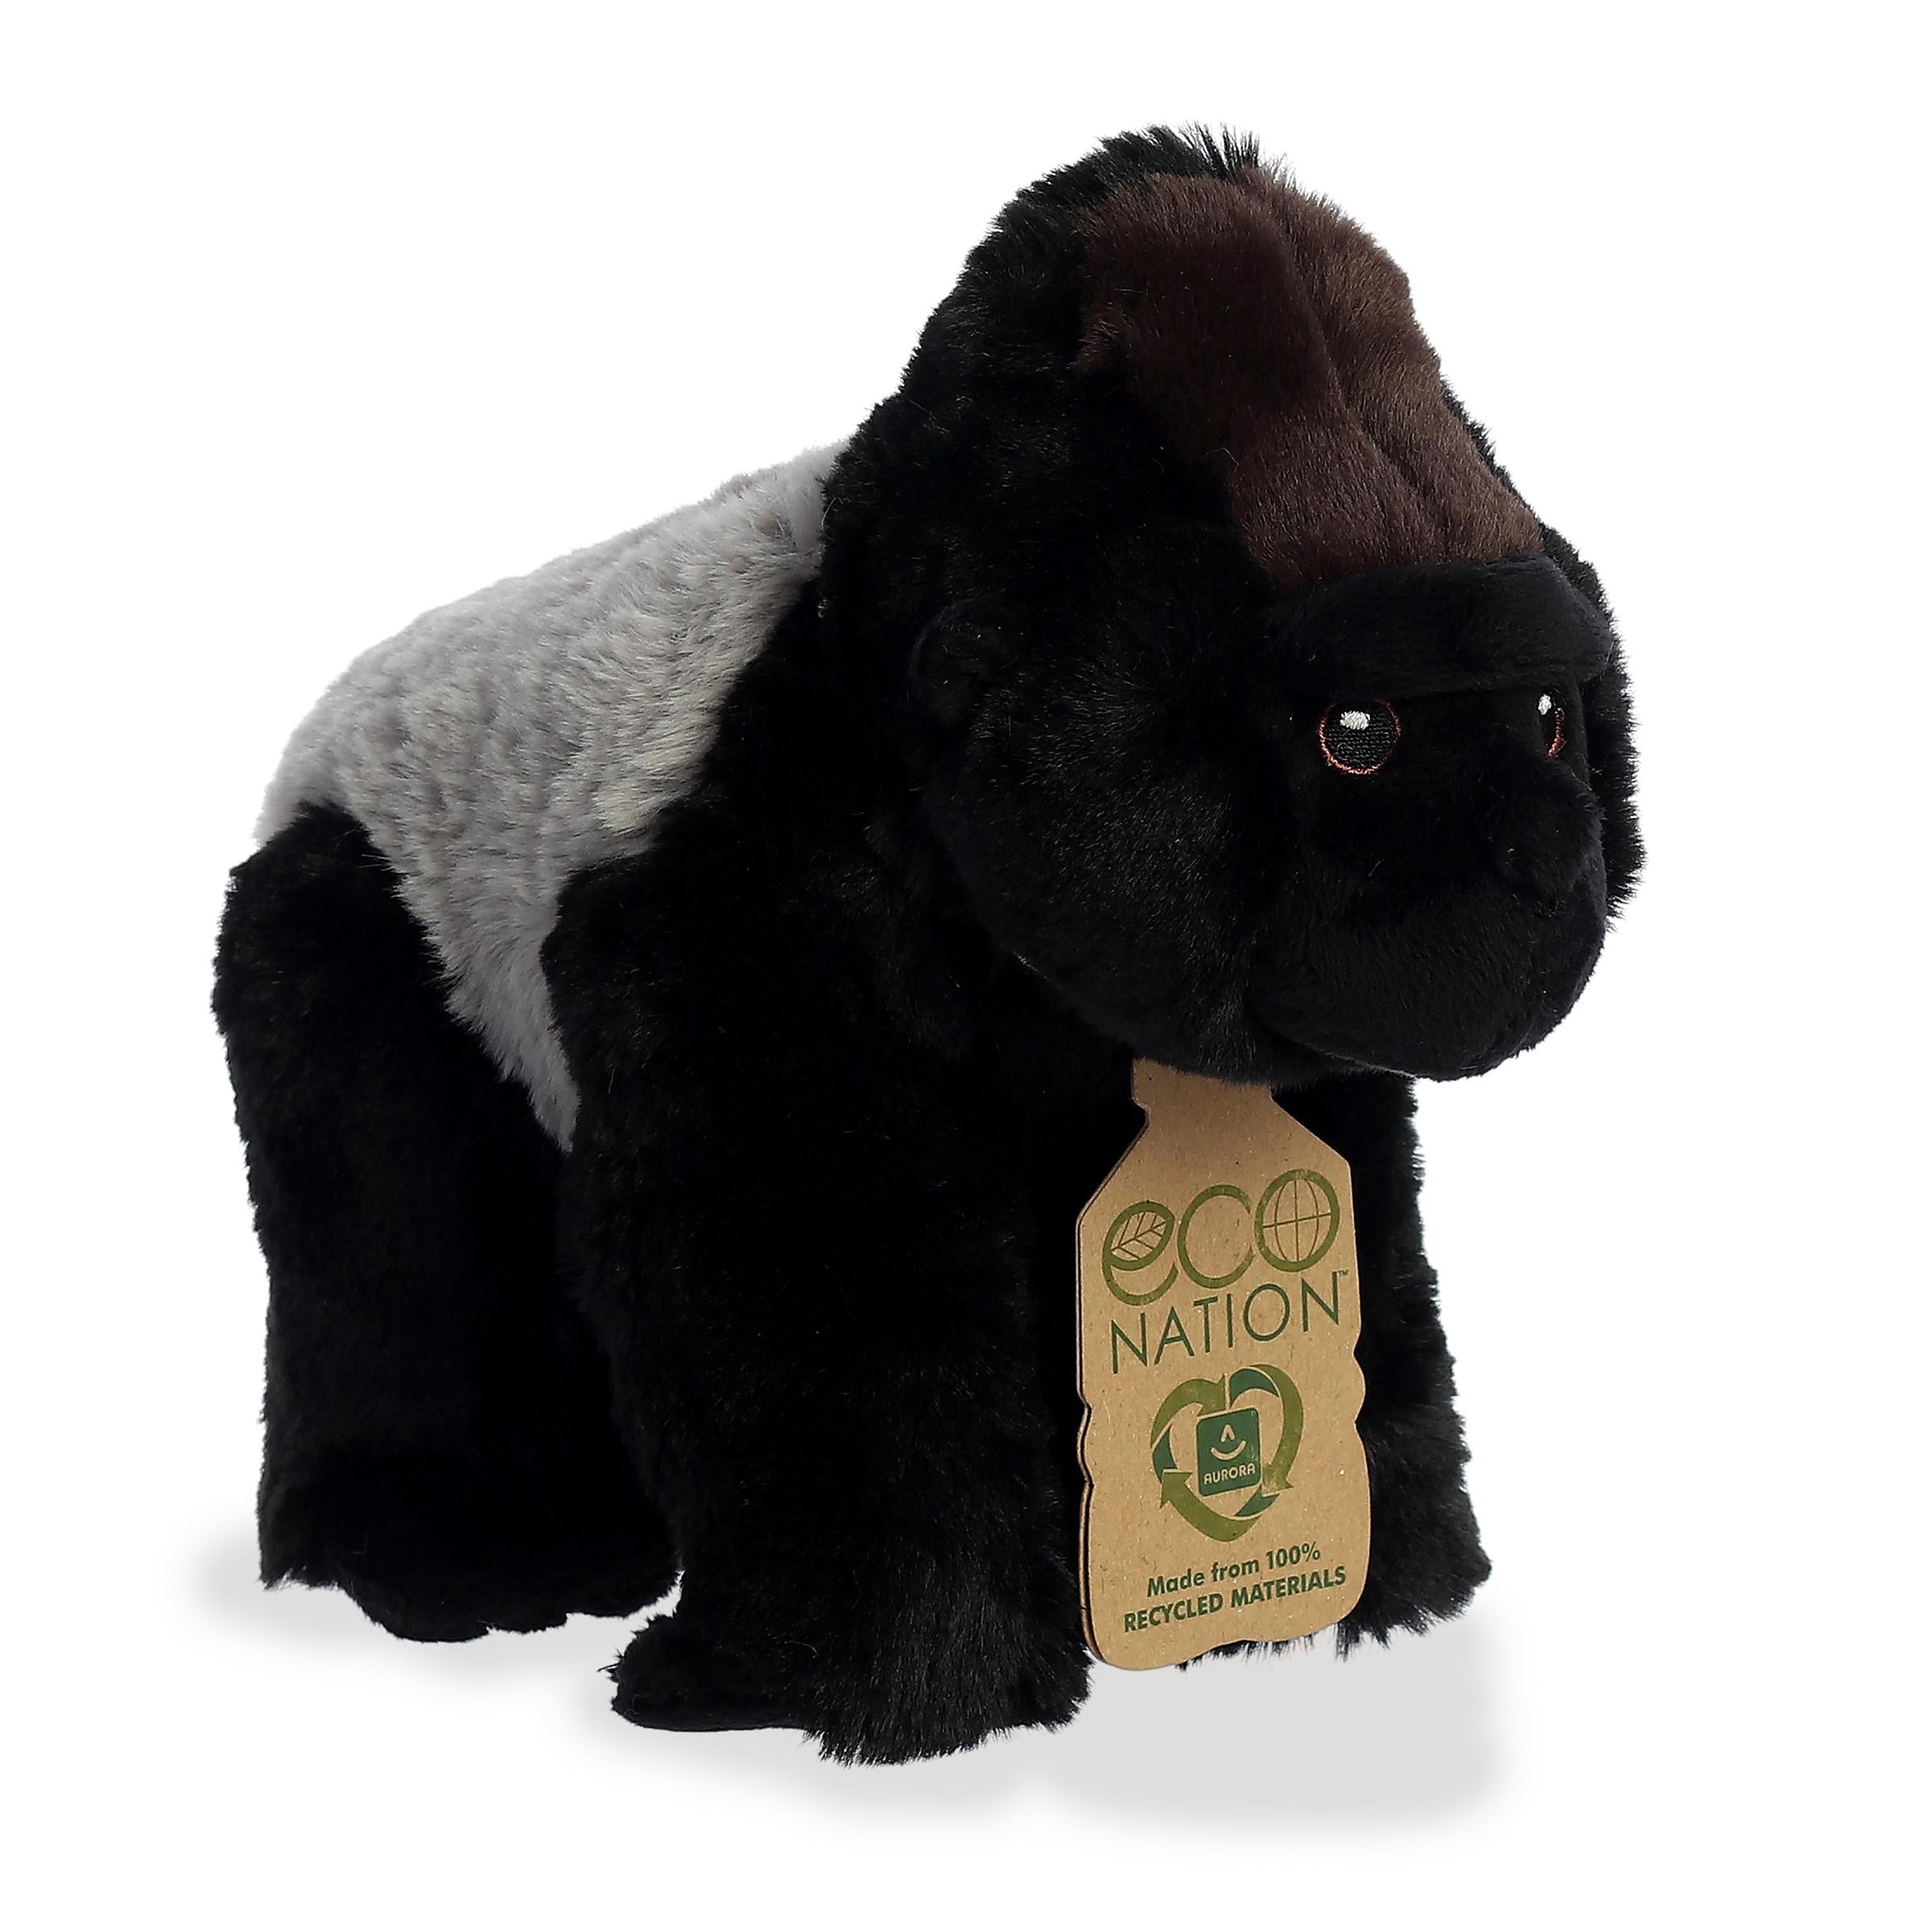 A majestic silverback gorilla plush with the iconic black and grey coat, finely embroidered eyes, and an eco-nation tag